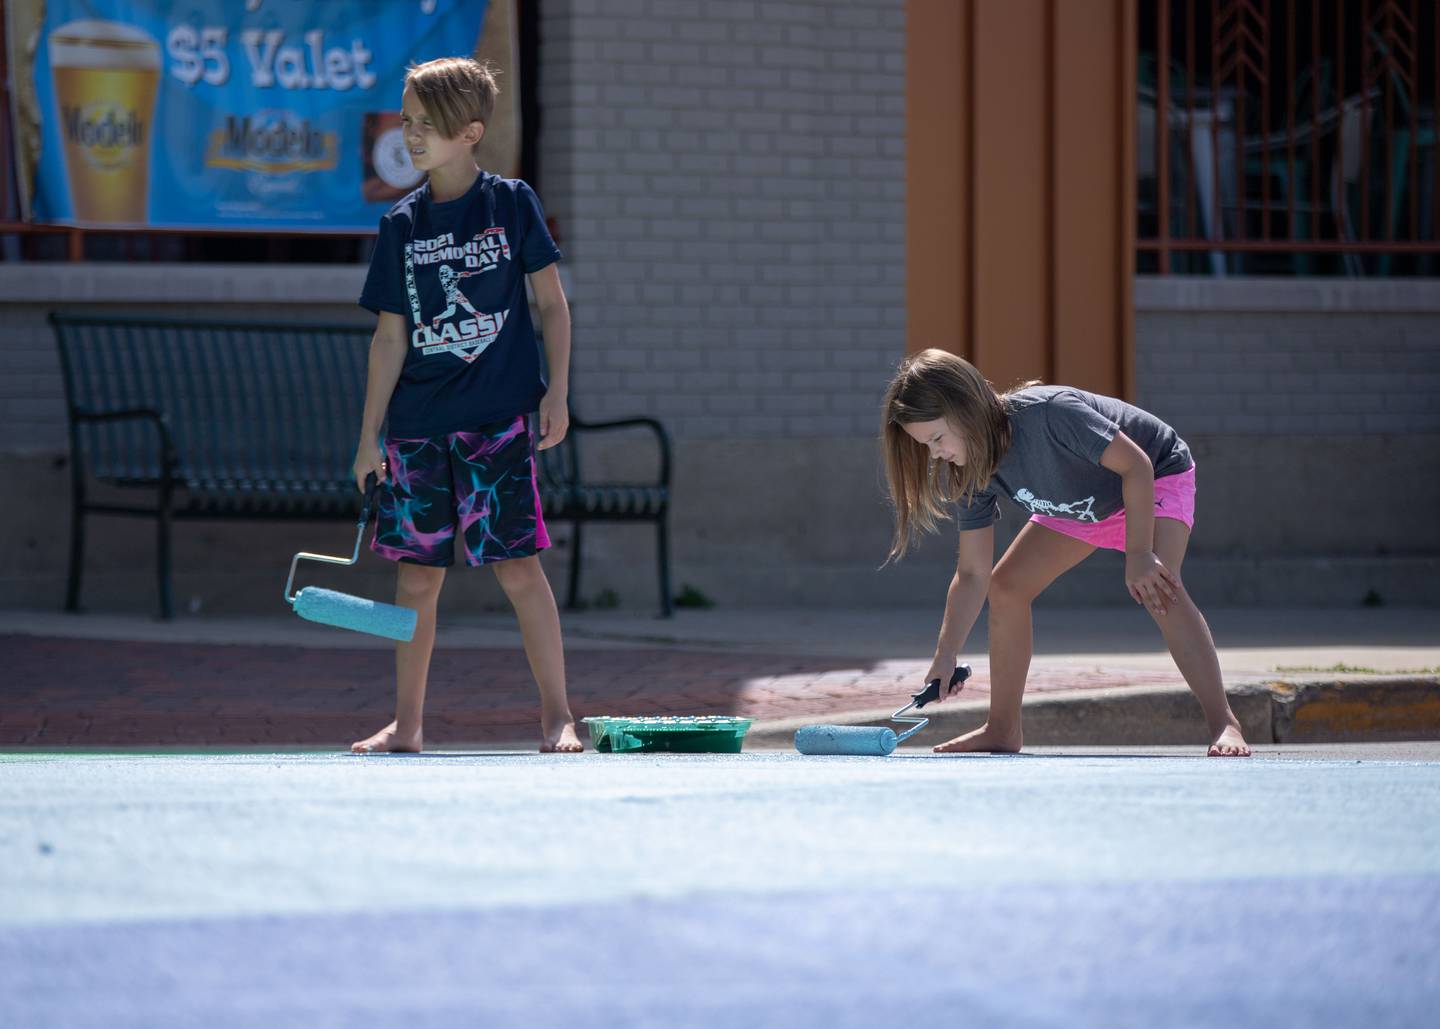 Lucas, 9, left, and Penelope, 7, Kunz of St. Charles paint the intersection of Riverside Avenue and Walnut Street in St. Charles at the Paint the Riverside event hosted by the St. Charles Arts Council on Saturday, July 30, 2022.